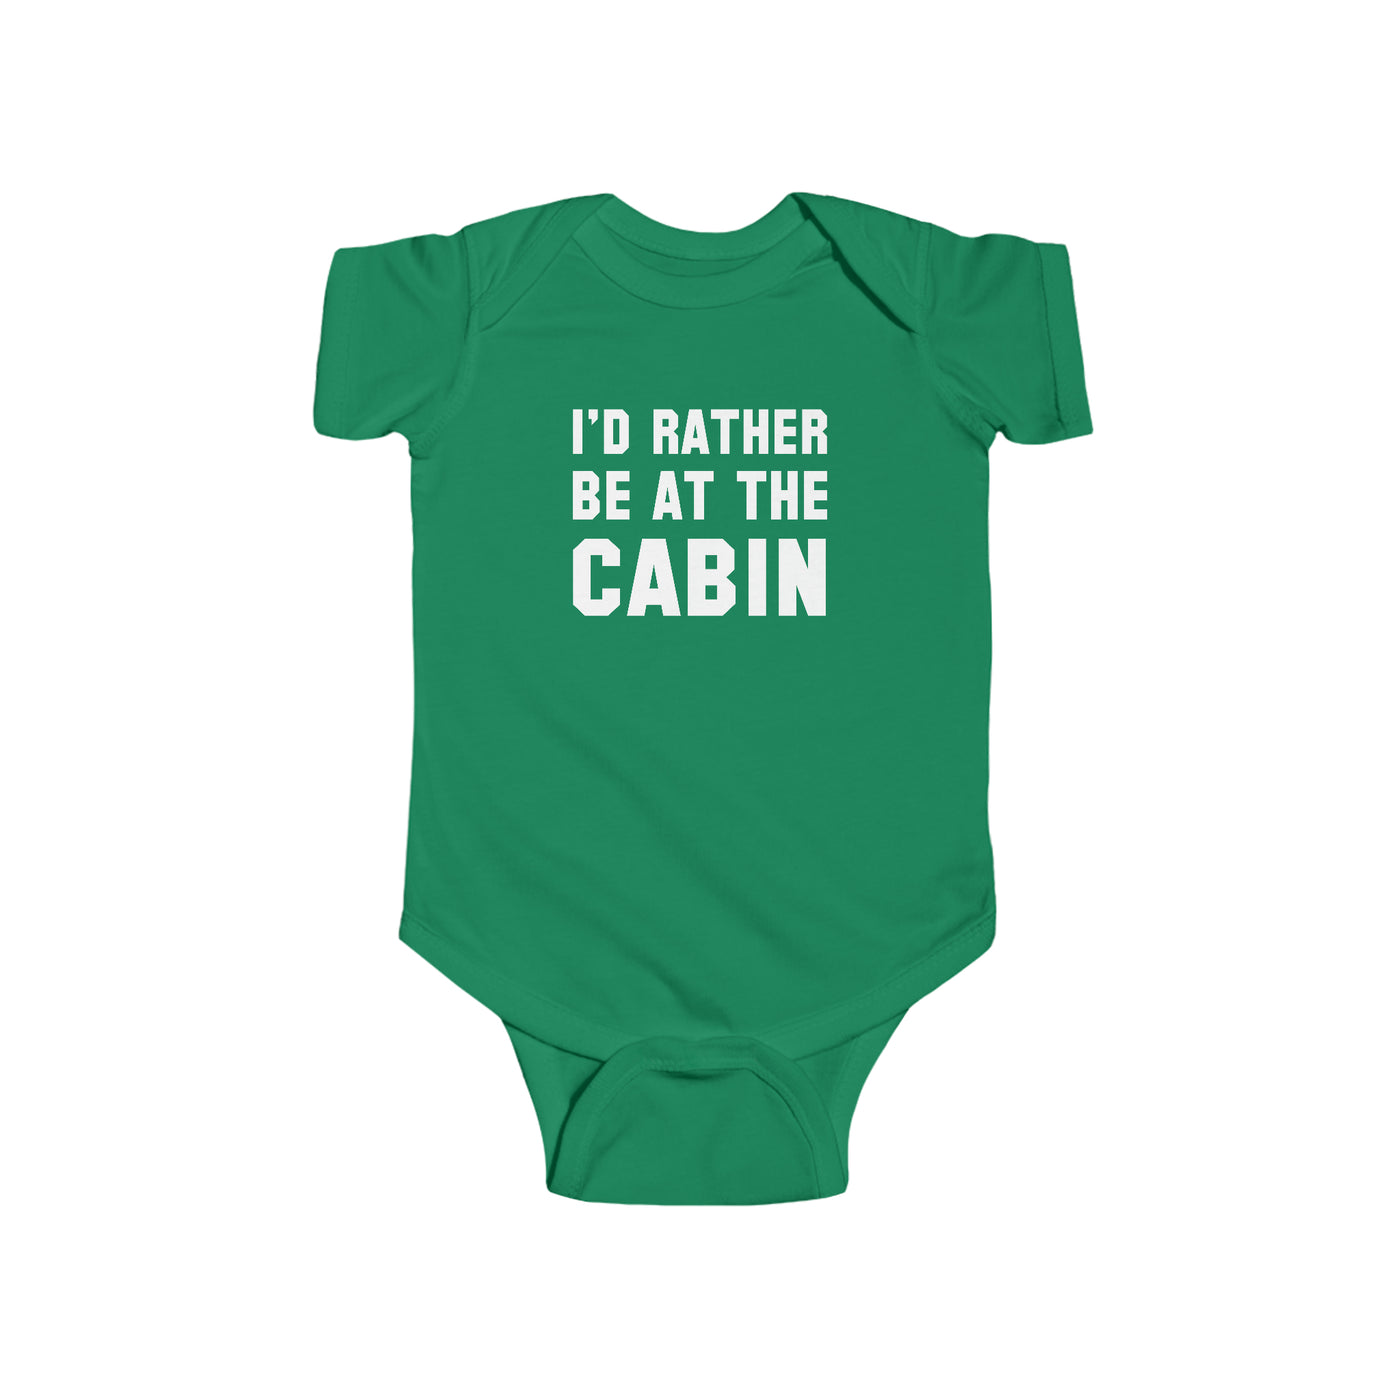 I'd Rather Be At The Cabin Baby Bodysuit